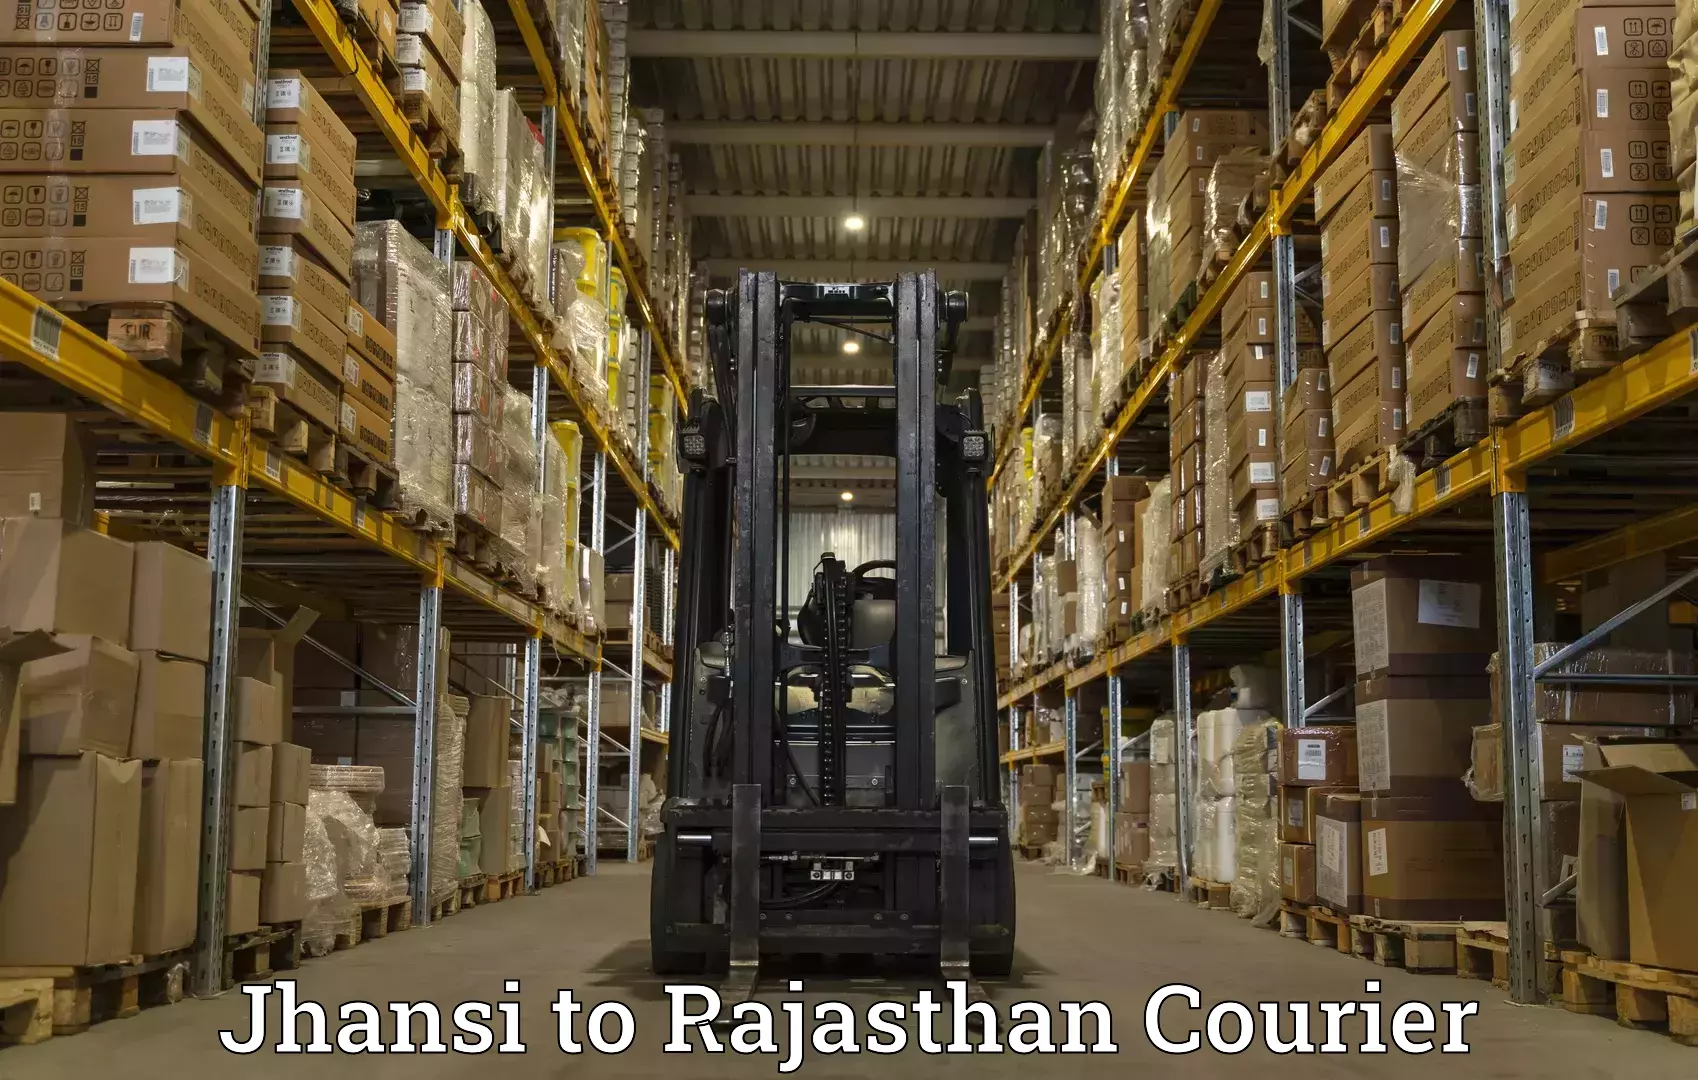 Express delivery capabilities Jhansi to Kuchaman